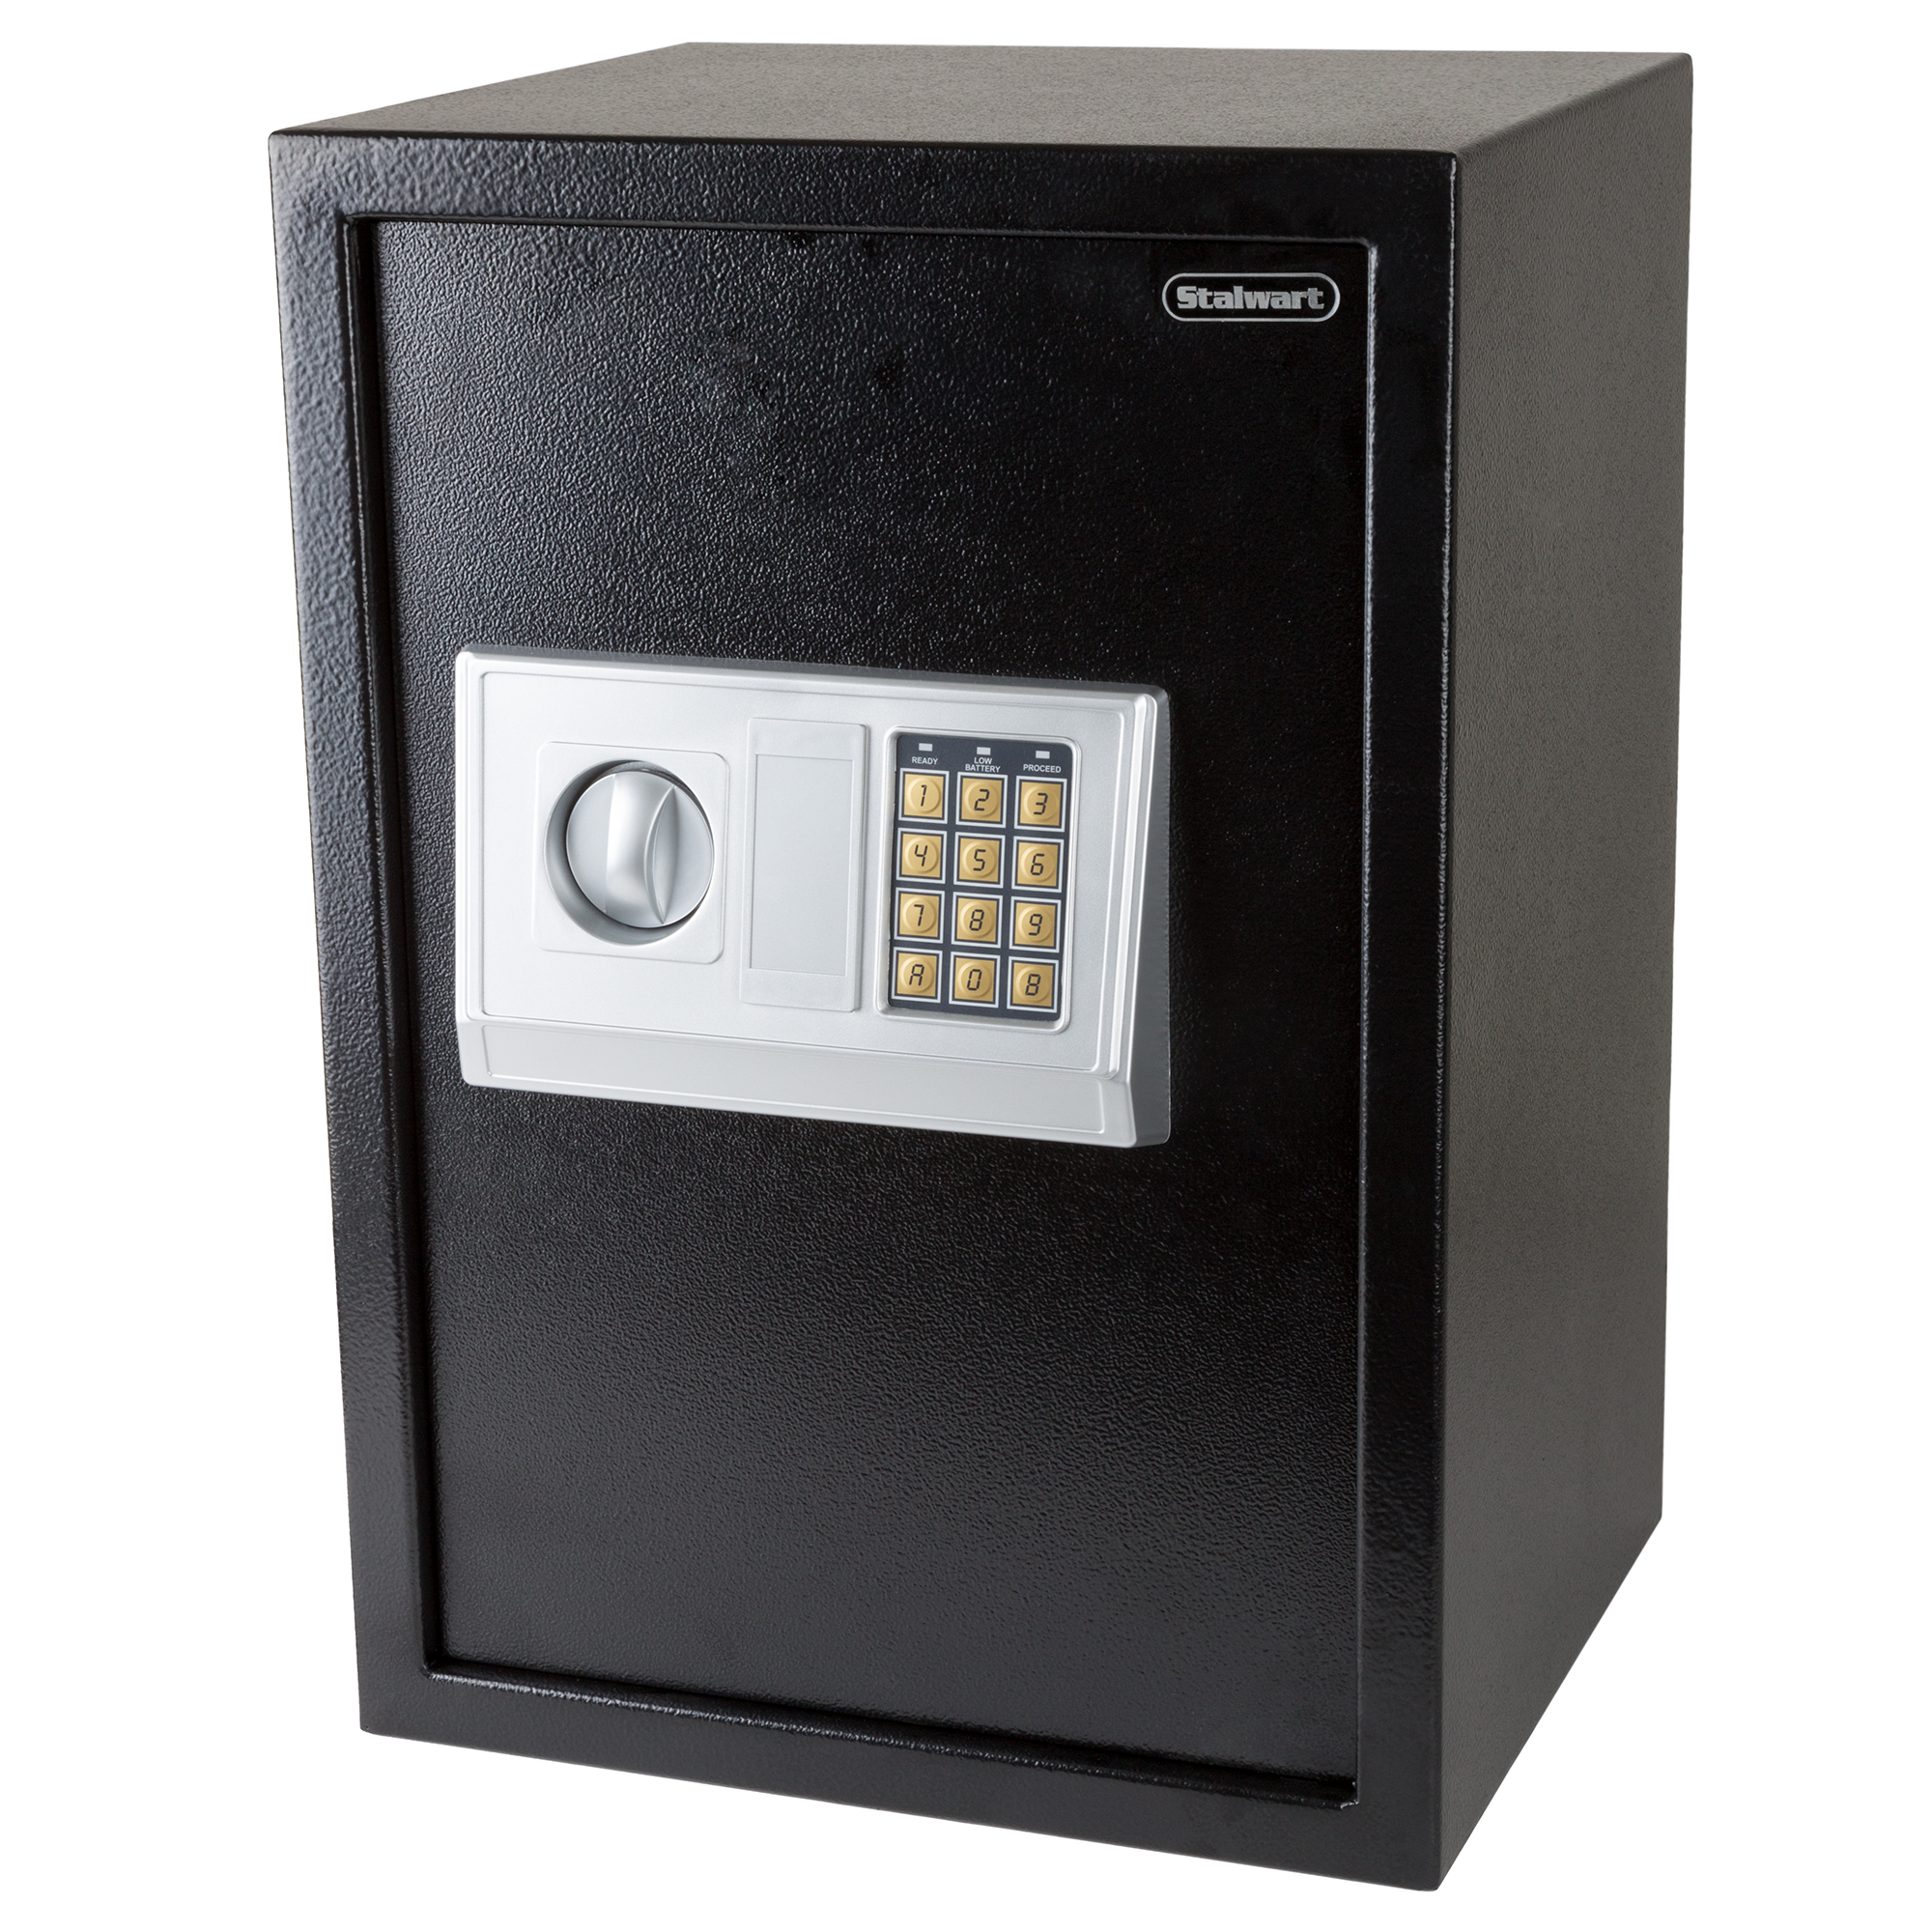 STALWART Electronic Digital Steel Safe Box with LED Keypad and 2 Manual Override Keys – Protect Money, Jewelry, Passports, and Documents – For Home, Business, and Travel - image 1 of 6